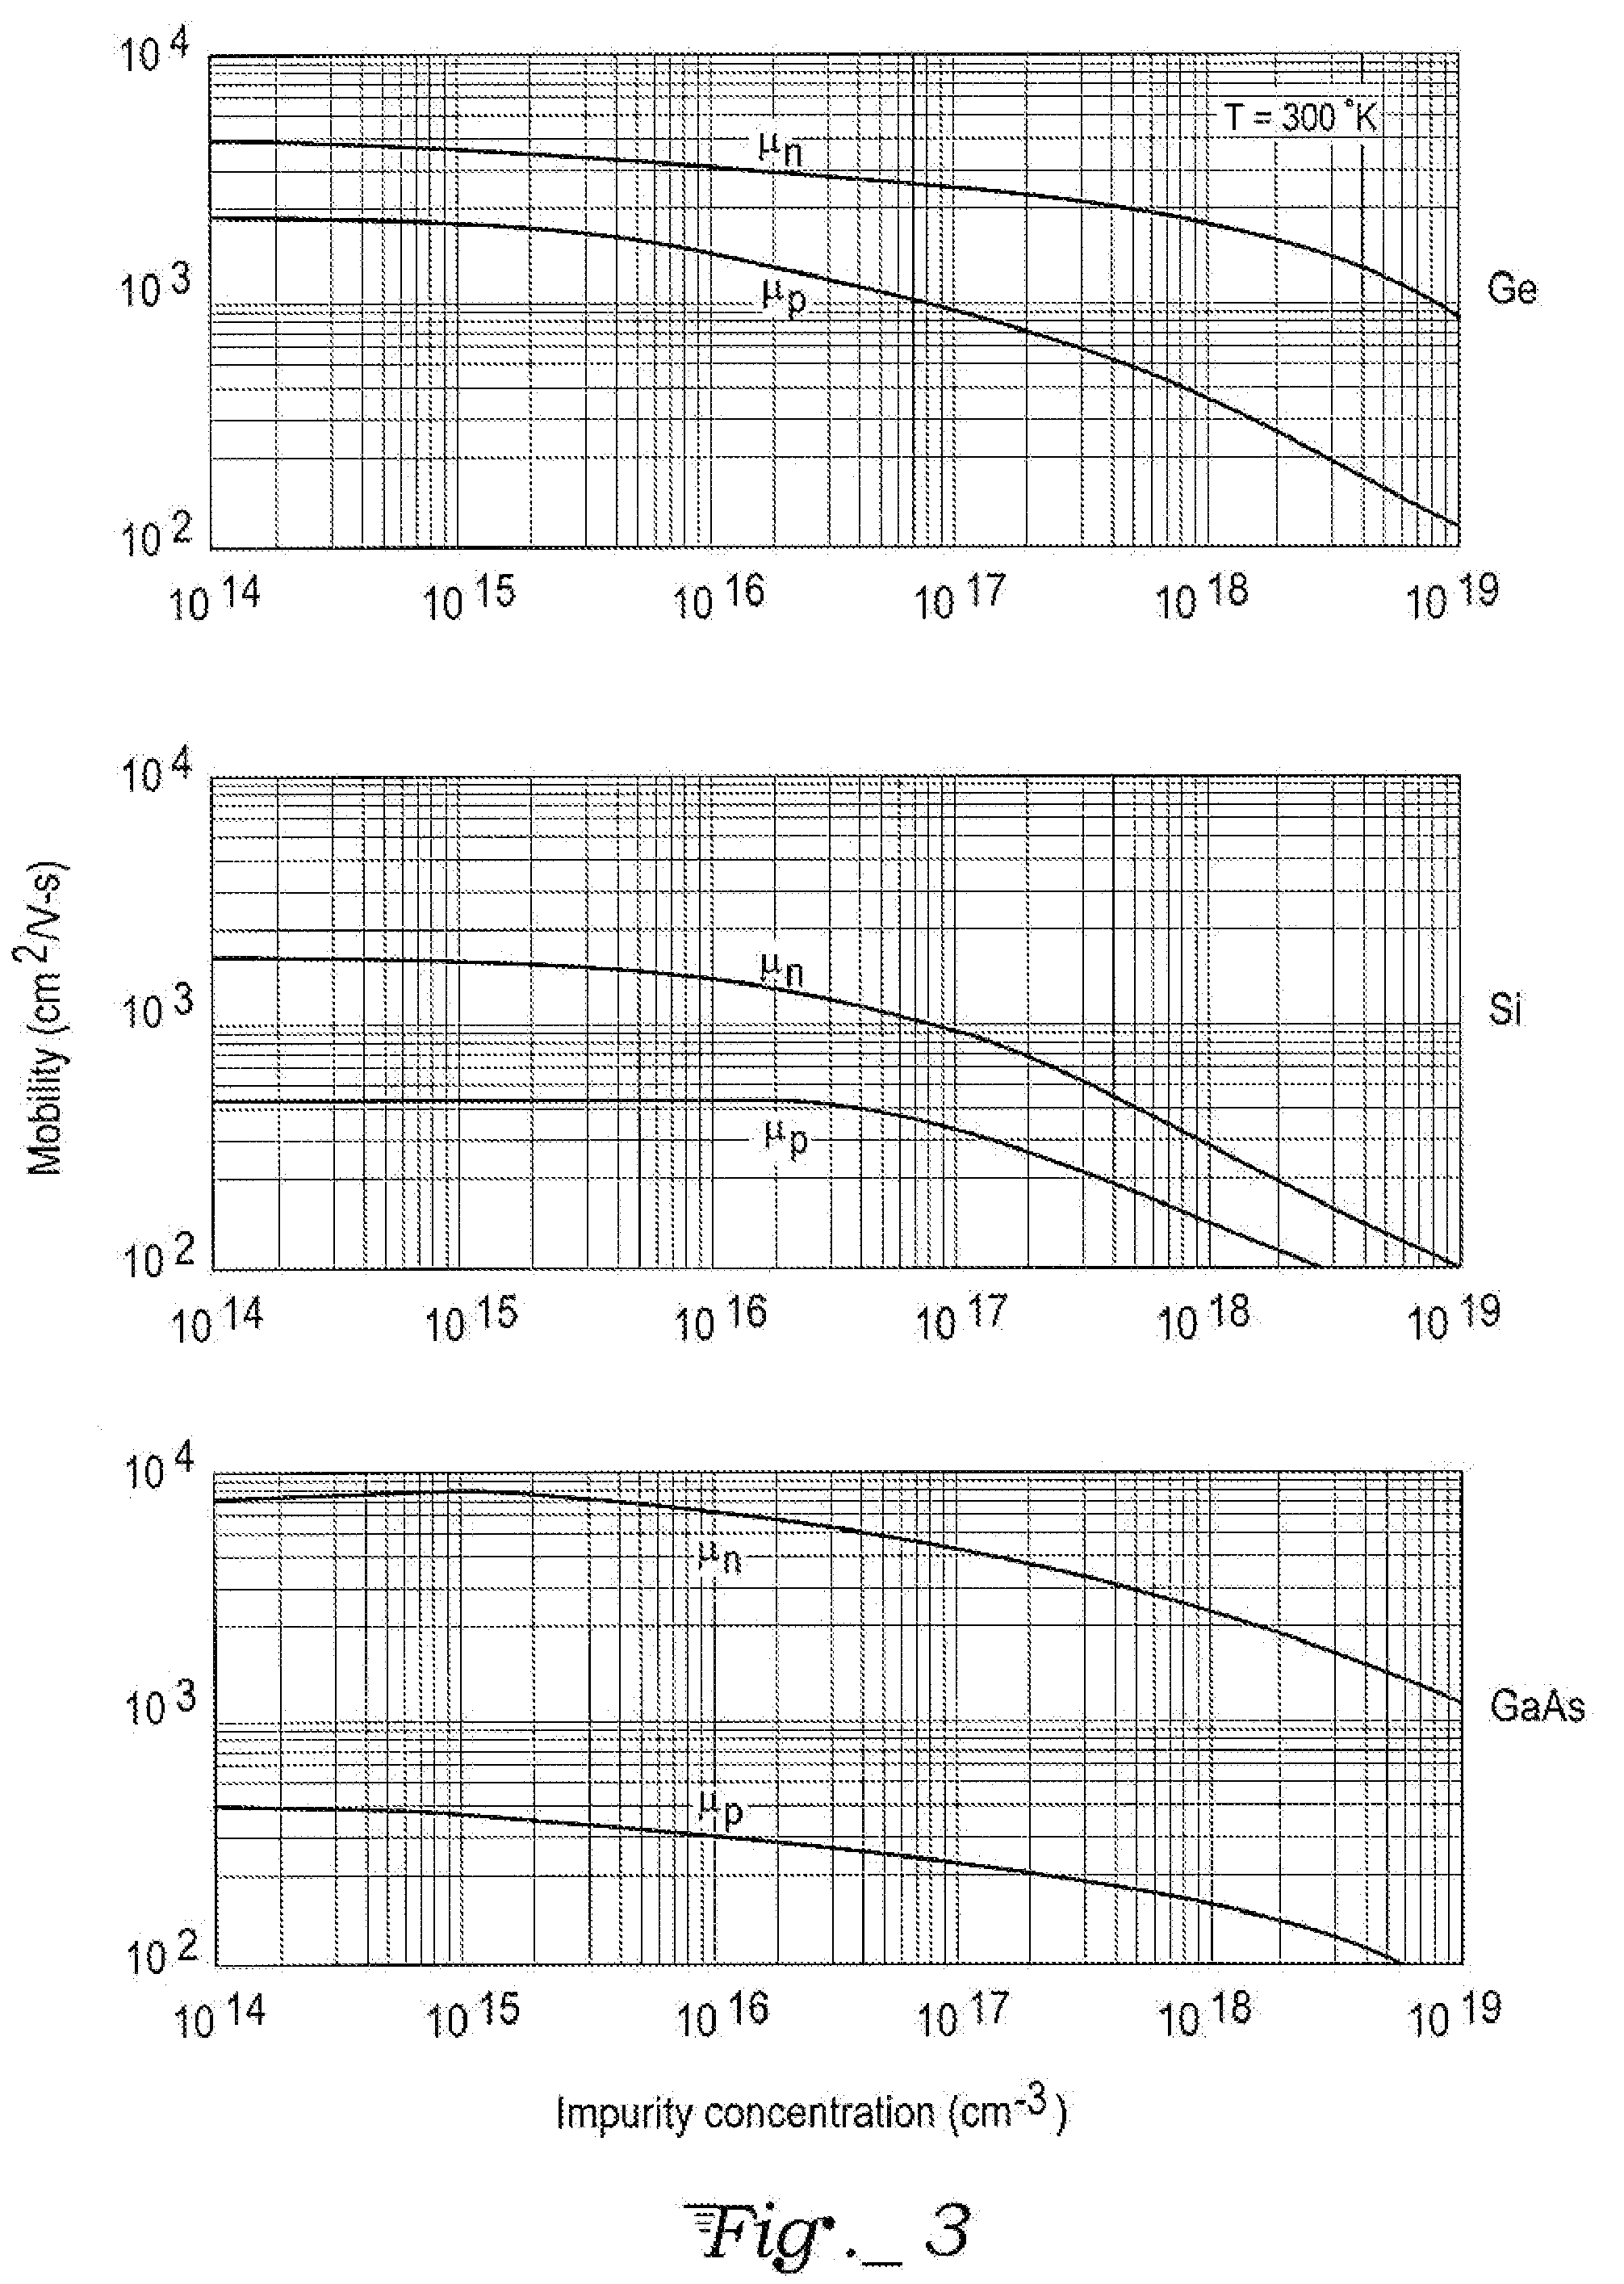 Hetrojunction bipolar transistor (HBT) with periodic multilayer base